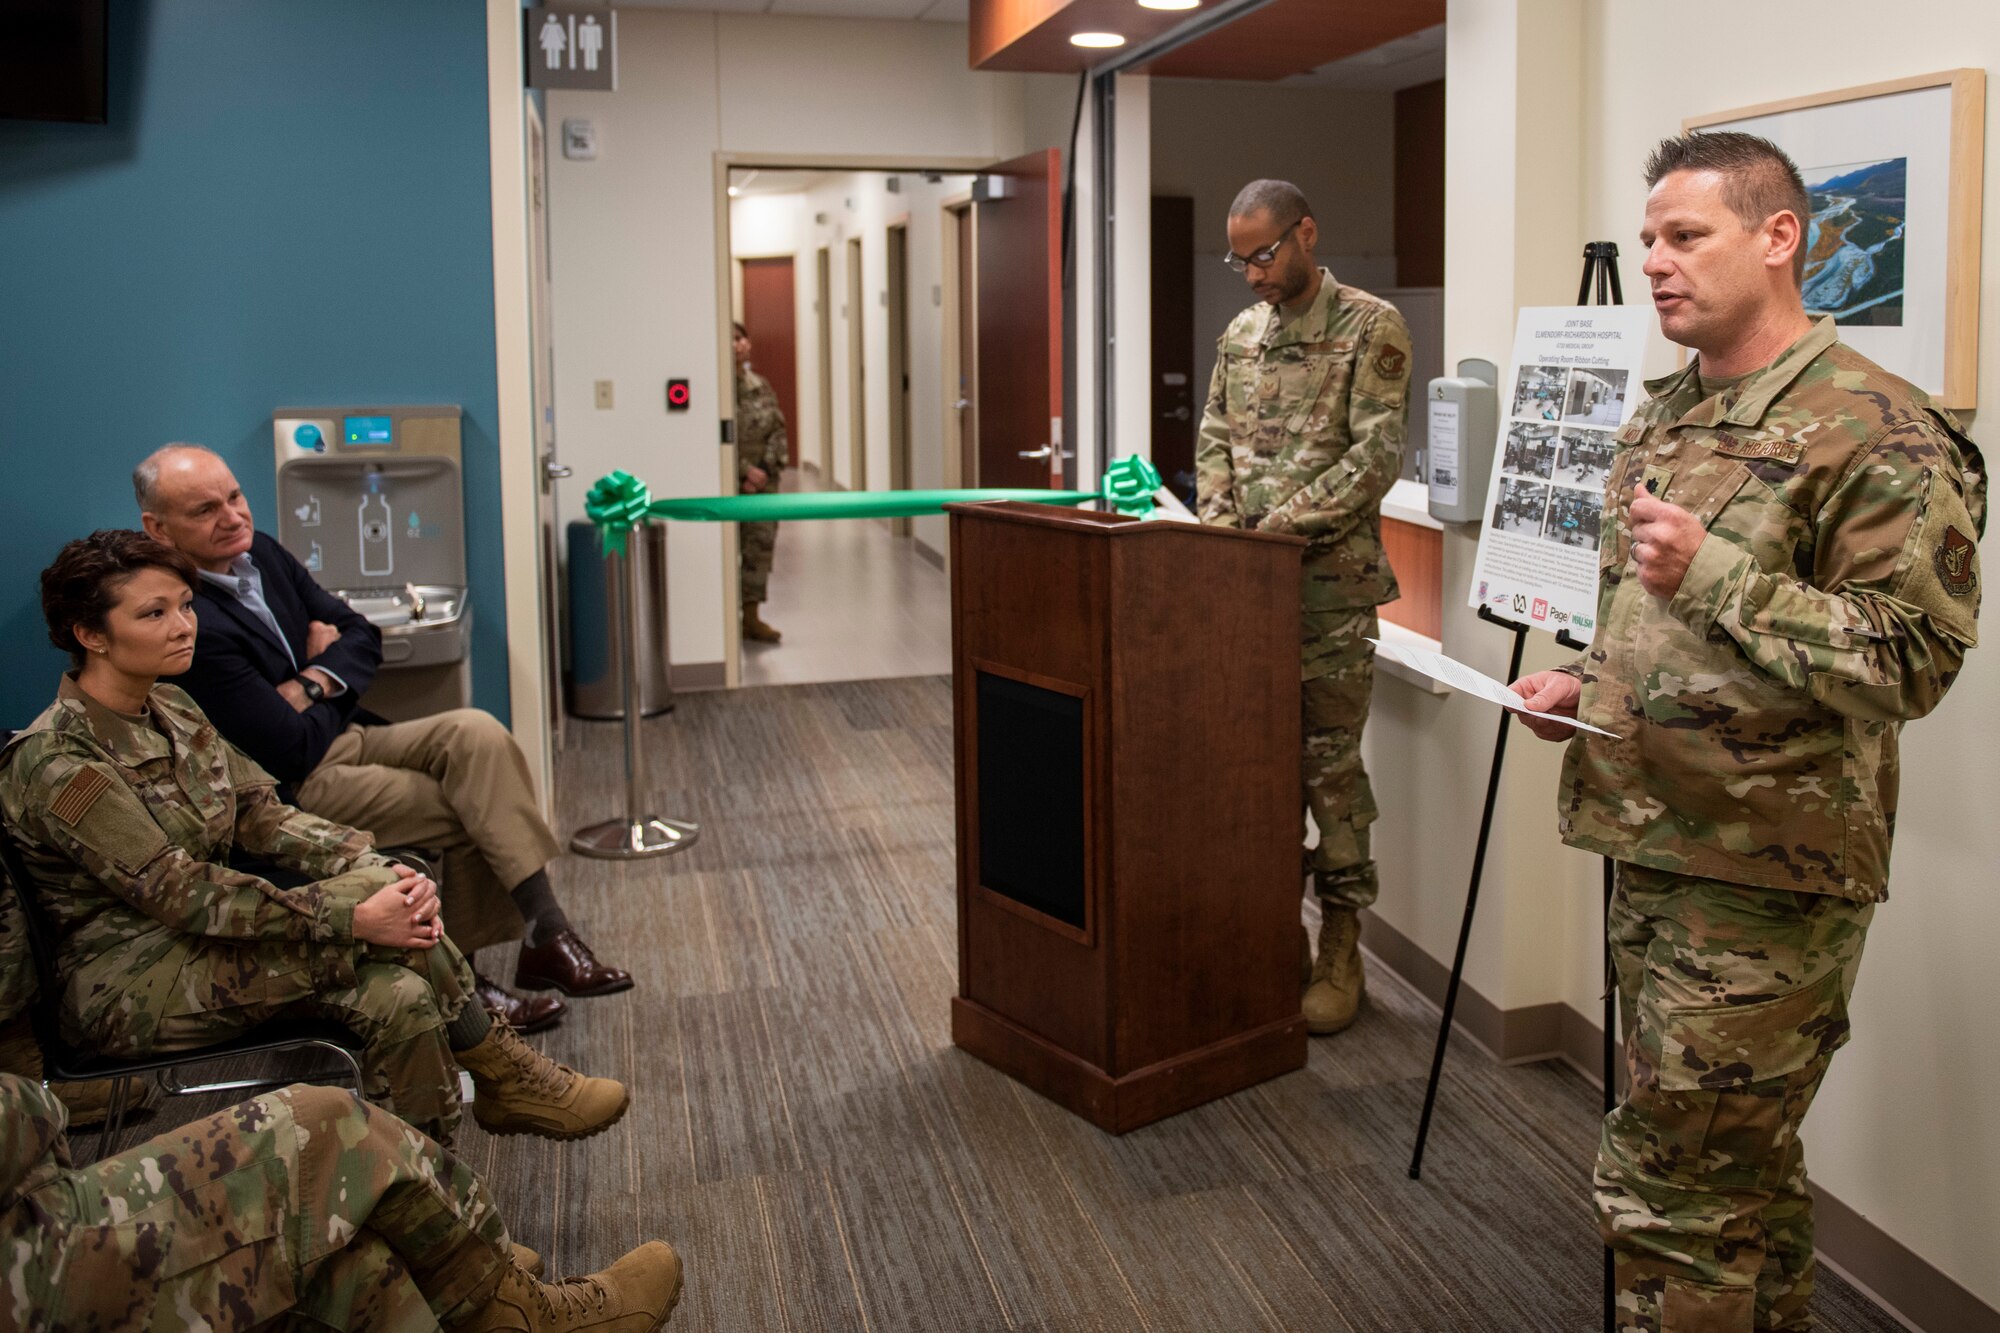 U.S. Air Force Lt. Col. Daniel Moore, 673d Surgical Operations Squadron Operating Room flight commander, speaks at a ribbon-cutting ceremony for the new MRI suite in the Joint Base Elmendorf-Richardson hospital on JBER, Alaska, Oct. 28, 2019. The MRI area remodel included the creation of one joint control room, rather than the former two control rooms in separate areas; an upgraded 1.5 Tesla GE scanner; and newer patient amenities such as dressing rooms, a reception desk, a waiting area, and murals and lighting in the scanner rooms for patient comfort.